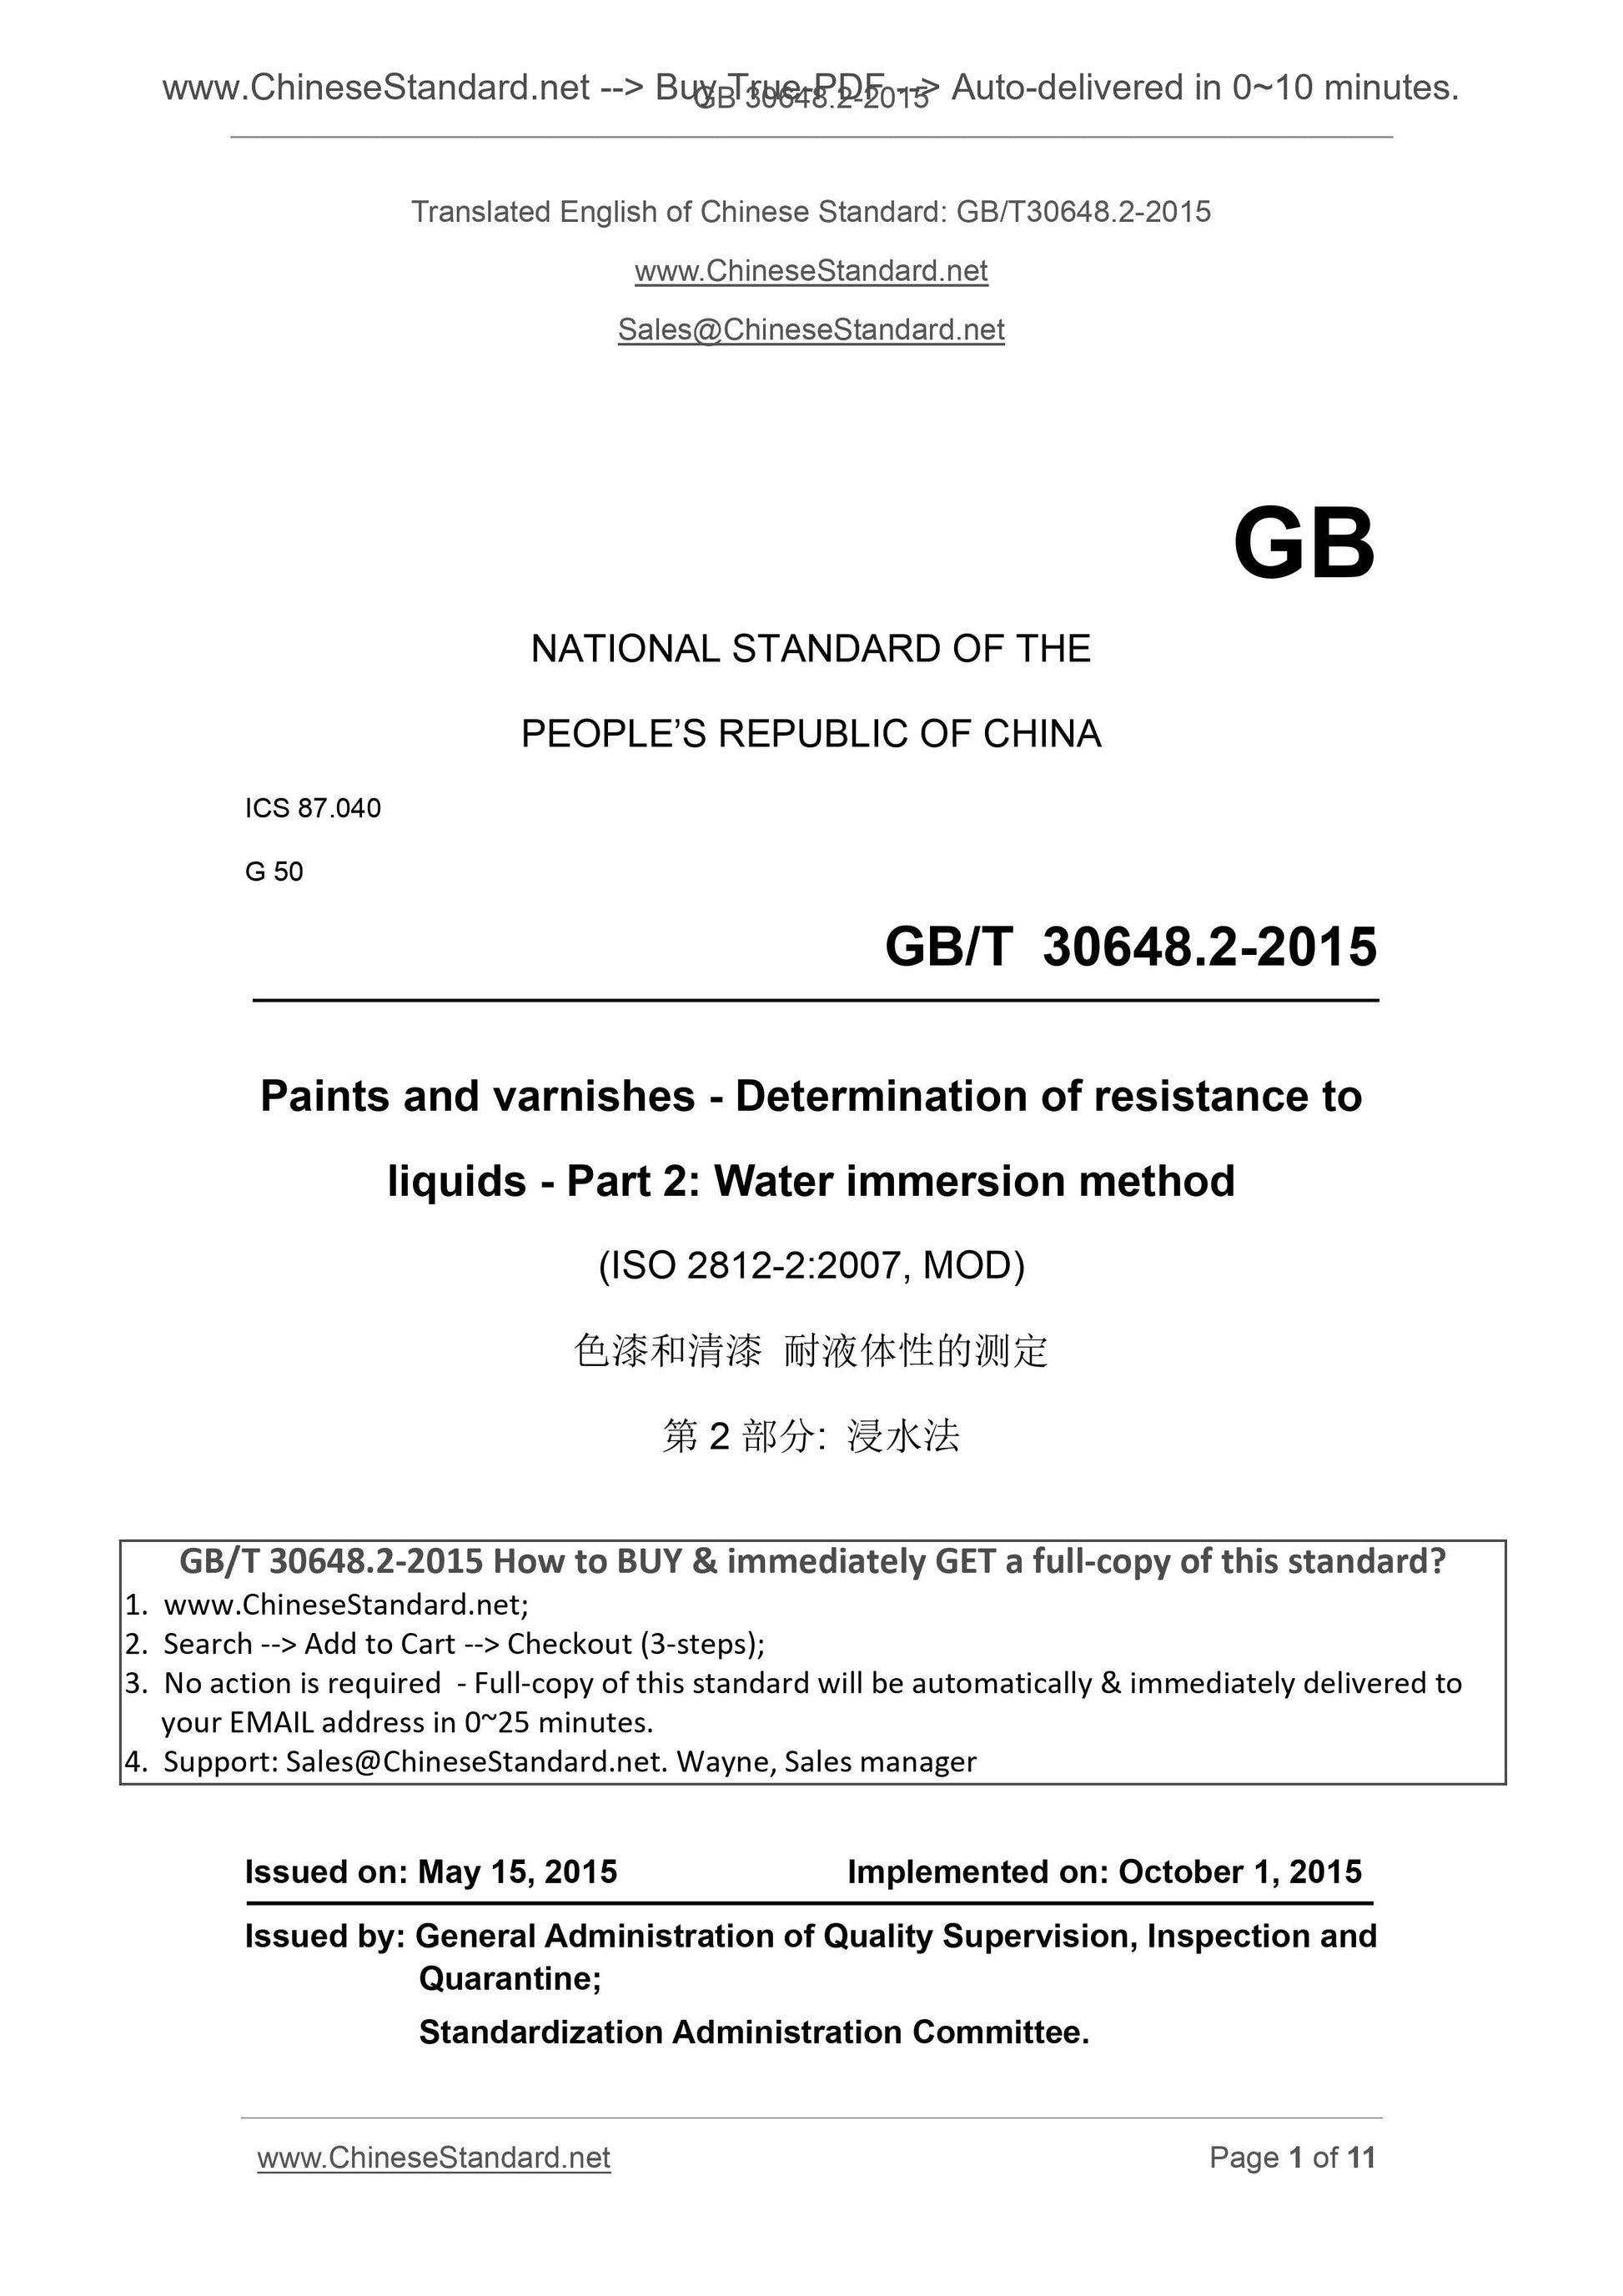 GB/T 30648.2-2015 Page 1